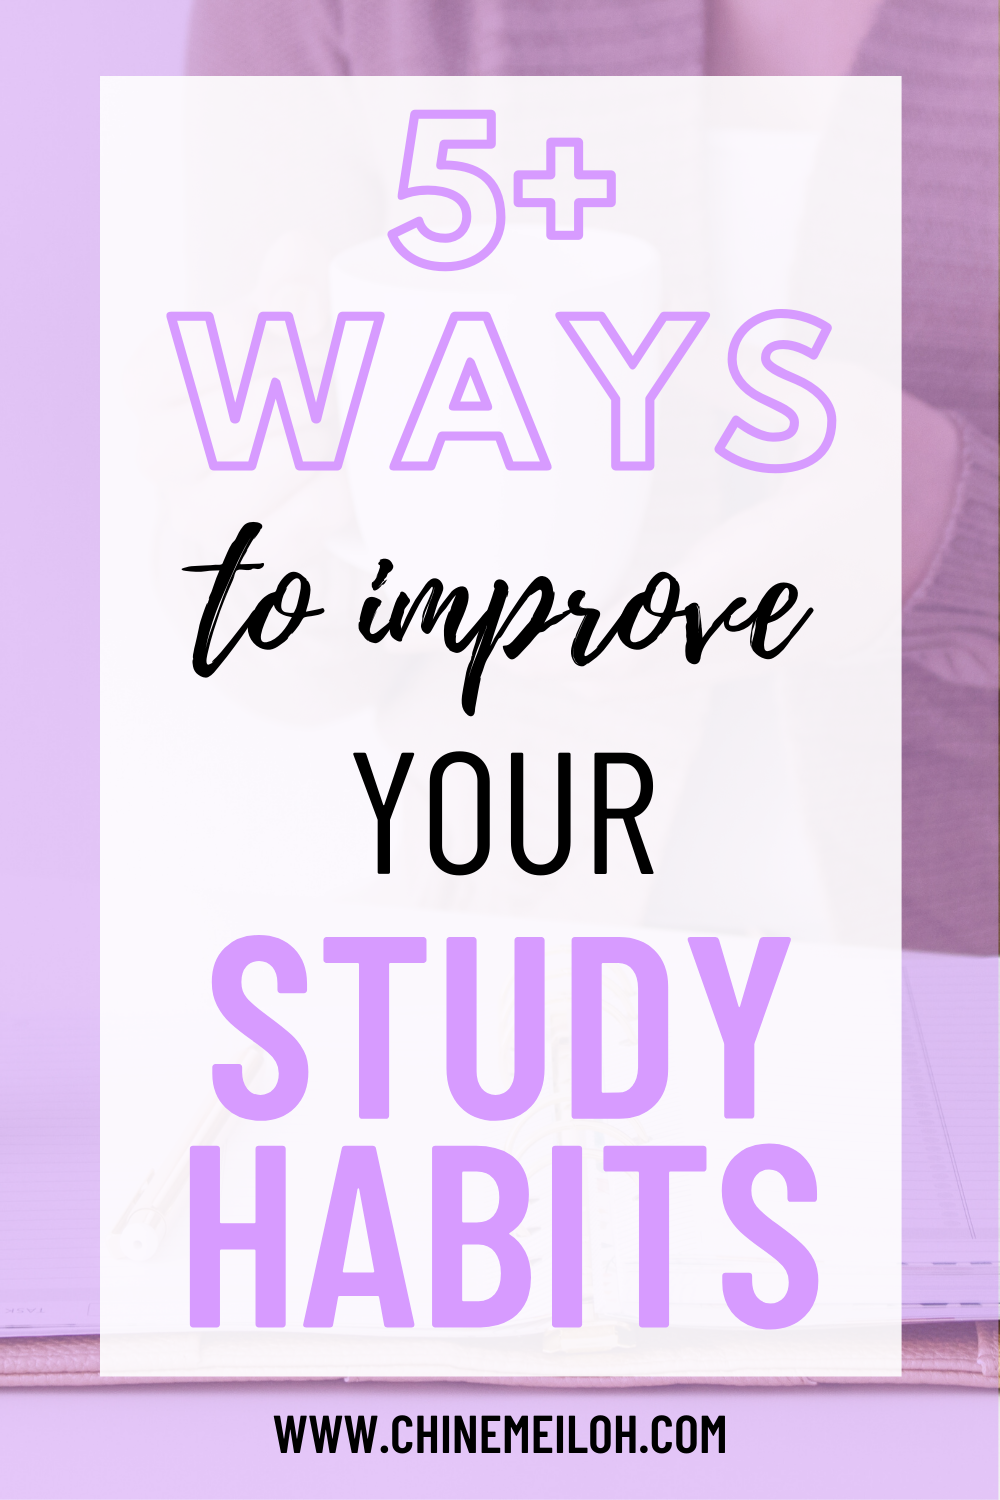 5 study habits that will change the way you study